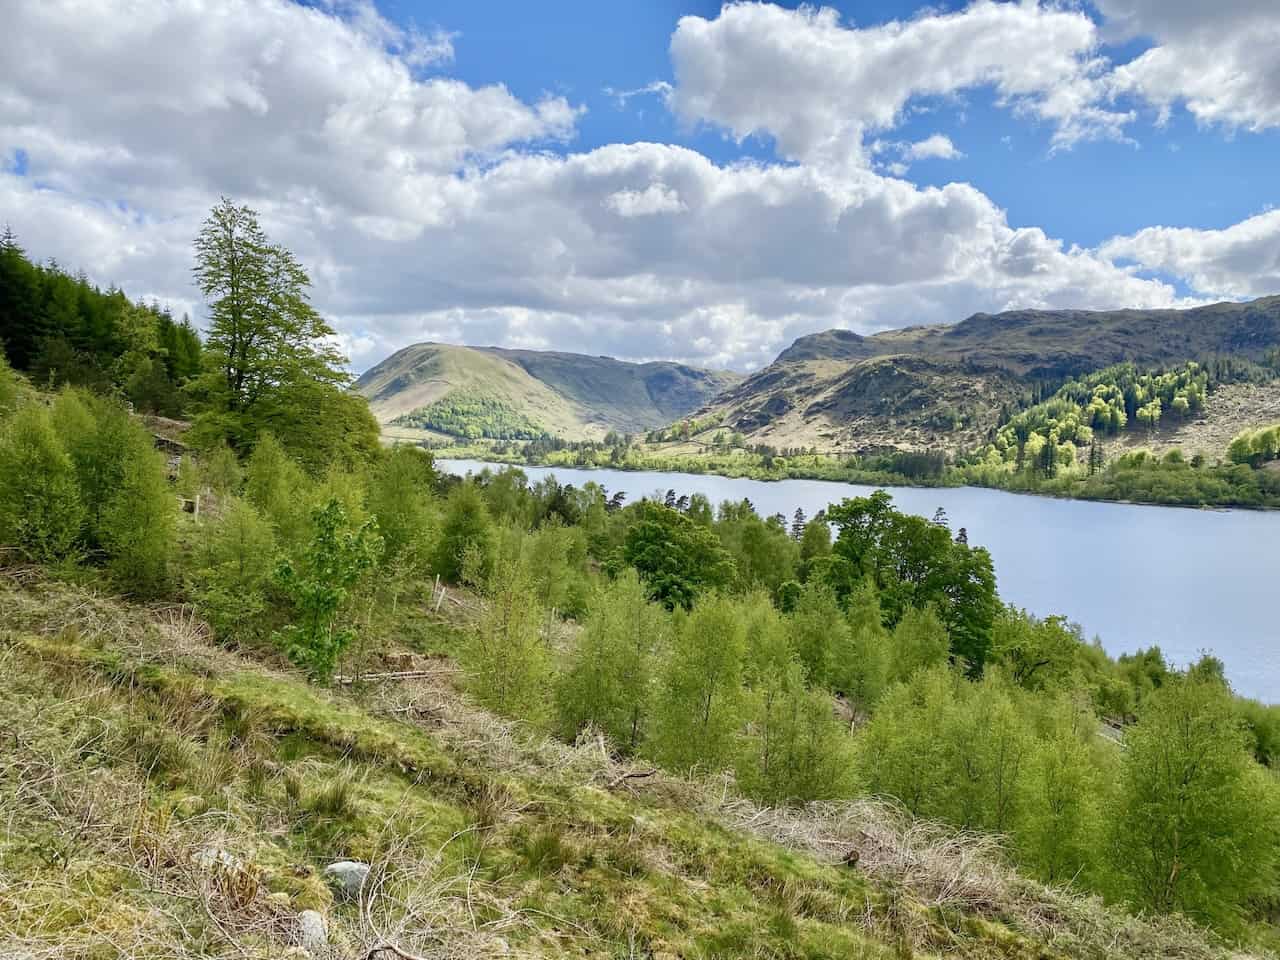 The view south-west towards Wythburn Fells at the southern extent of Thirlmere.